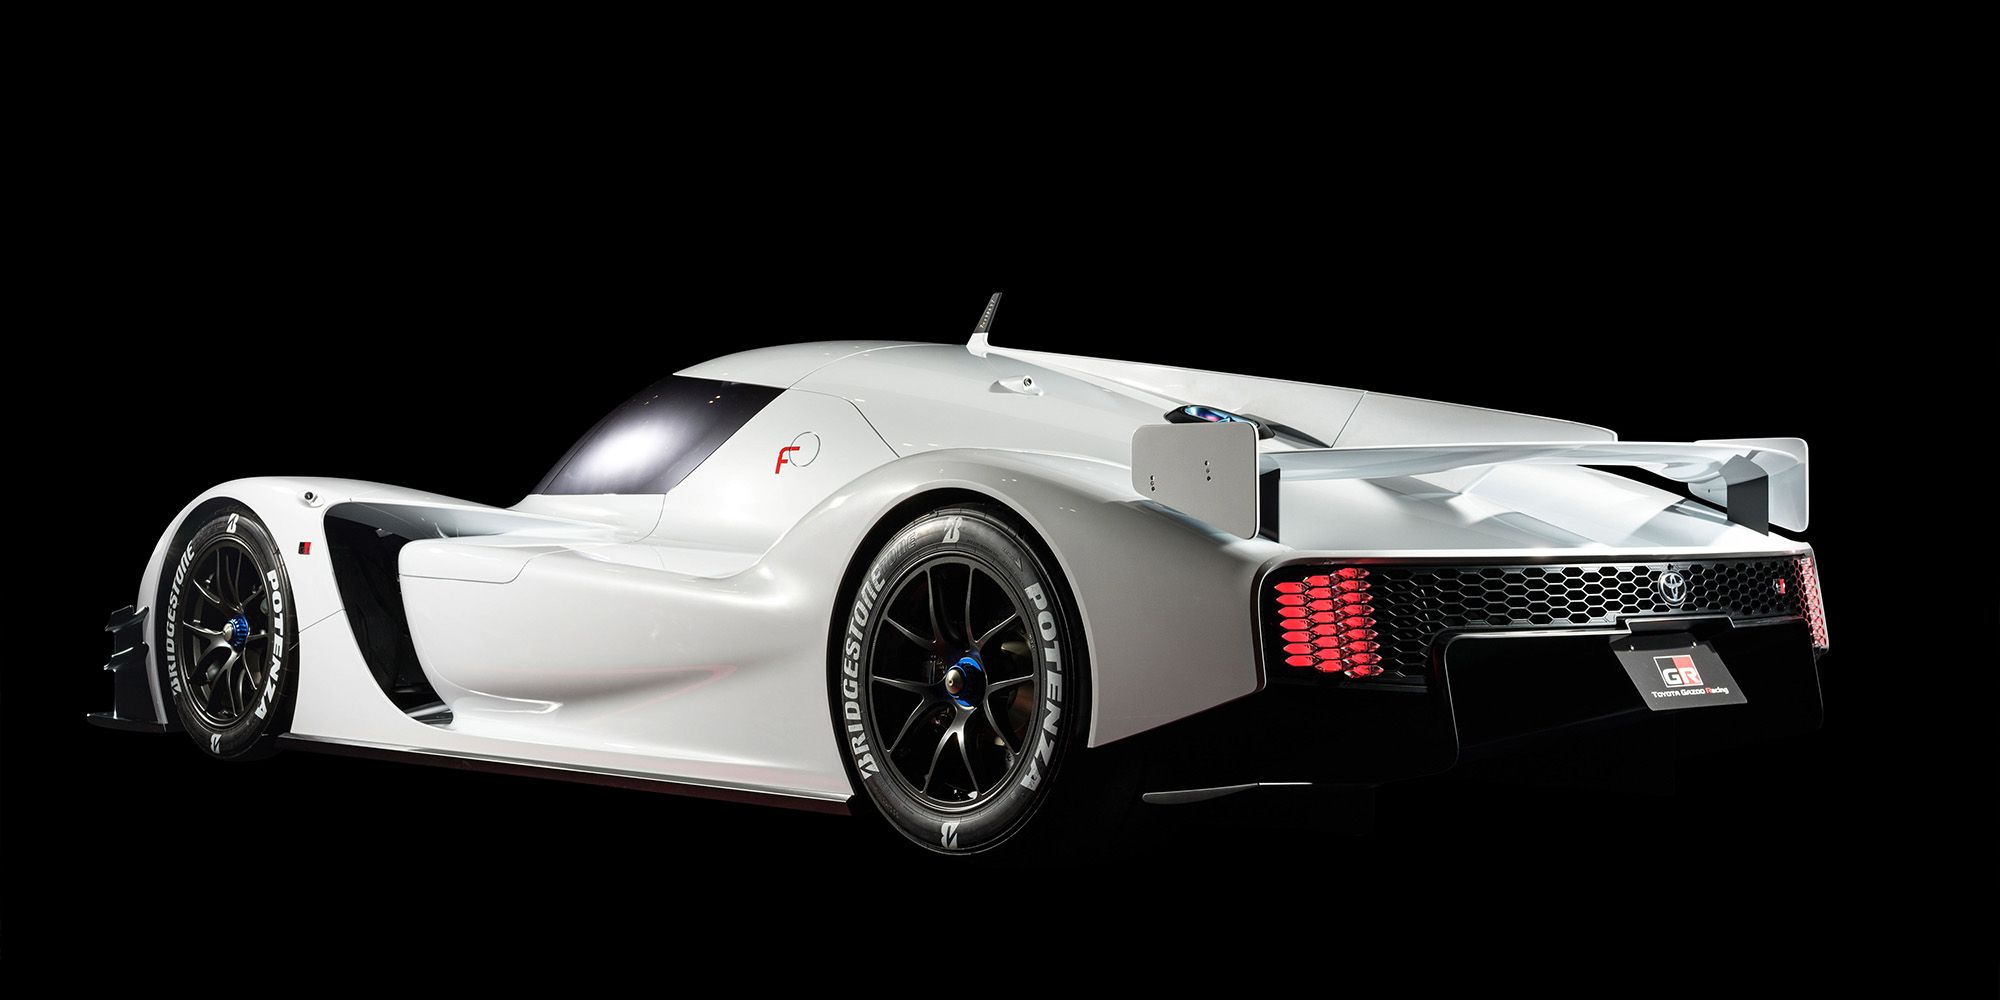 Rear 3/4 view of the GR Super Sport Concept